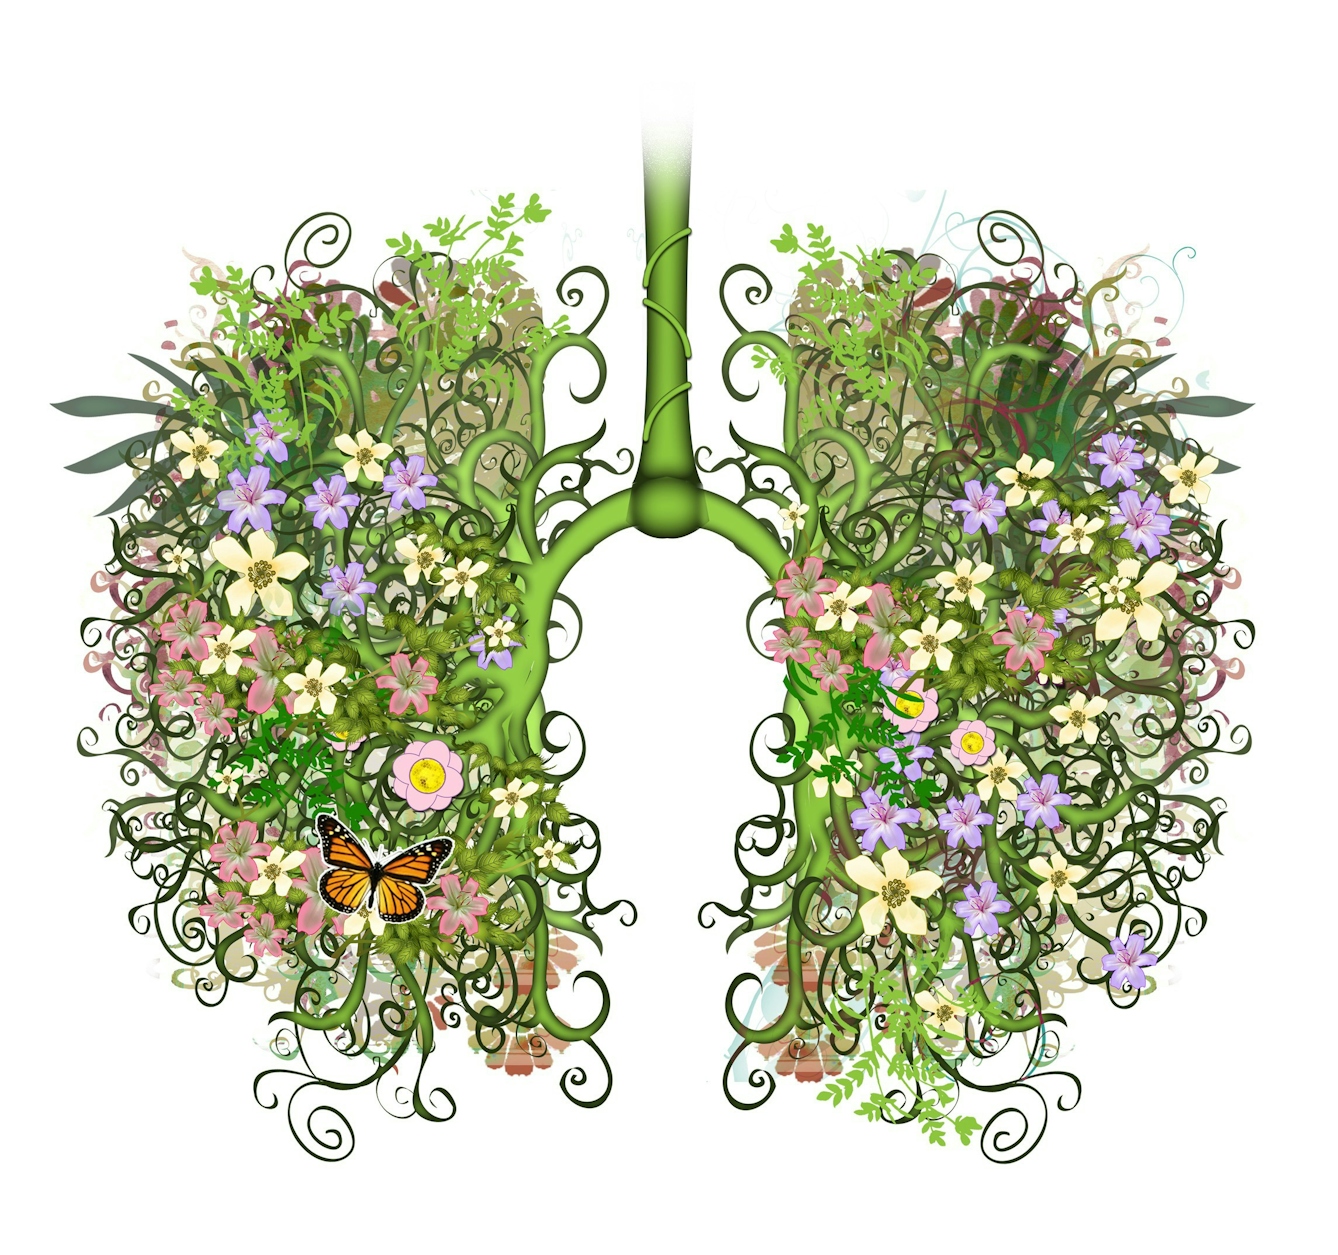 illustration of human lungs as flowers and foliage 